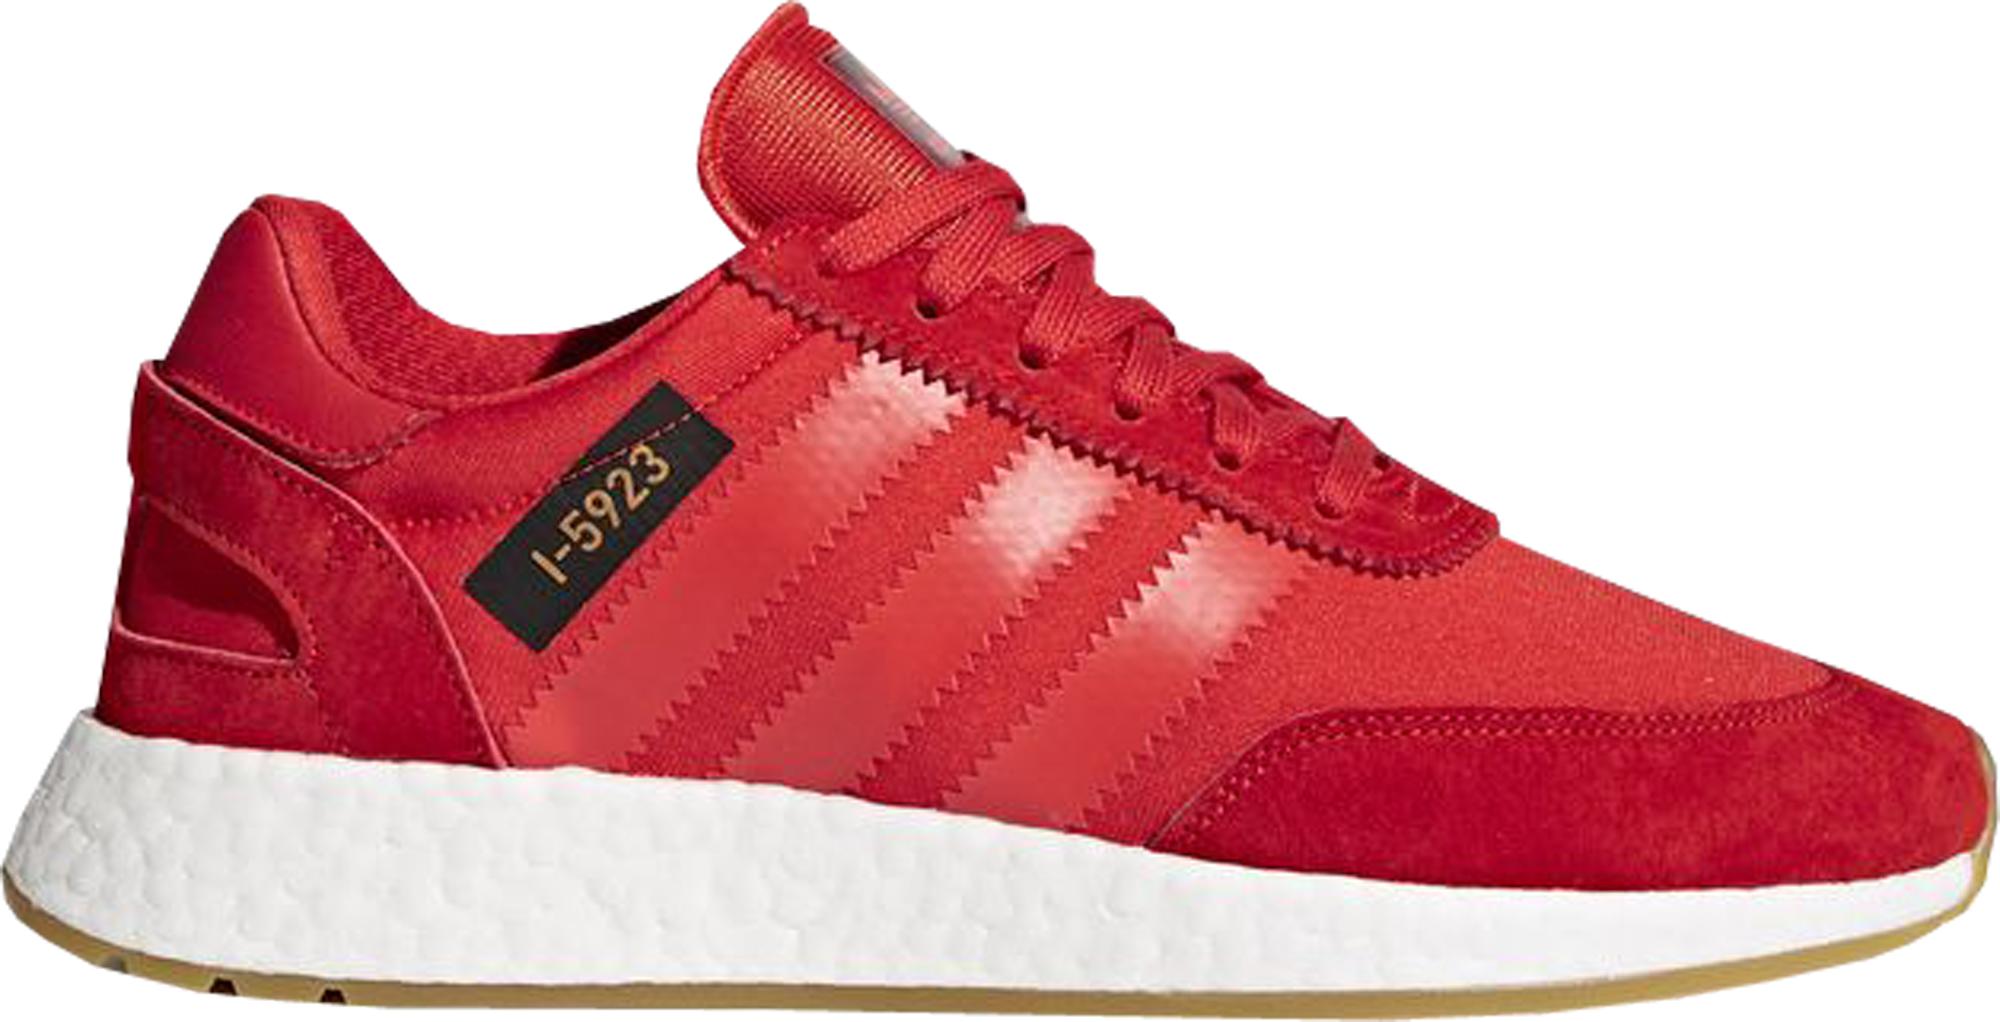 adidas I-5923 Core Red